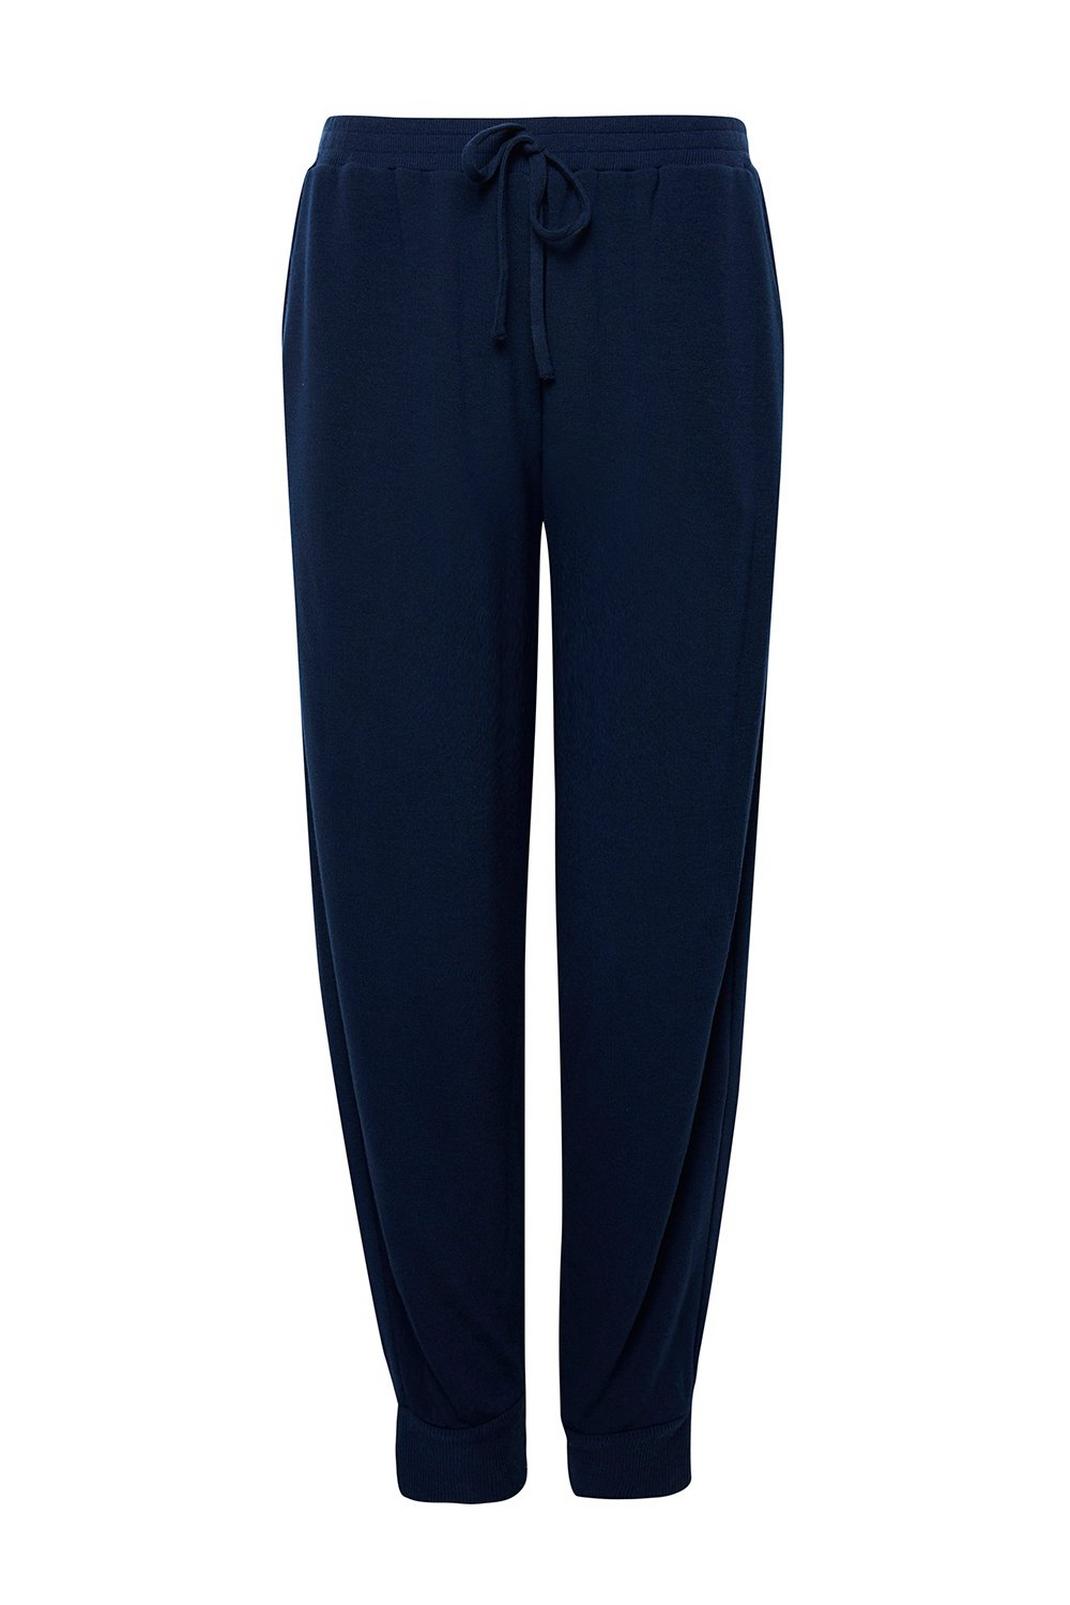 148 PETITE Navy Jogger image number 2